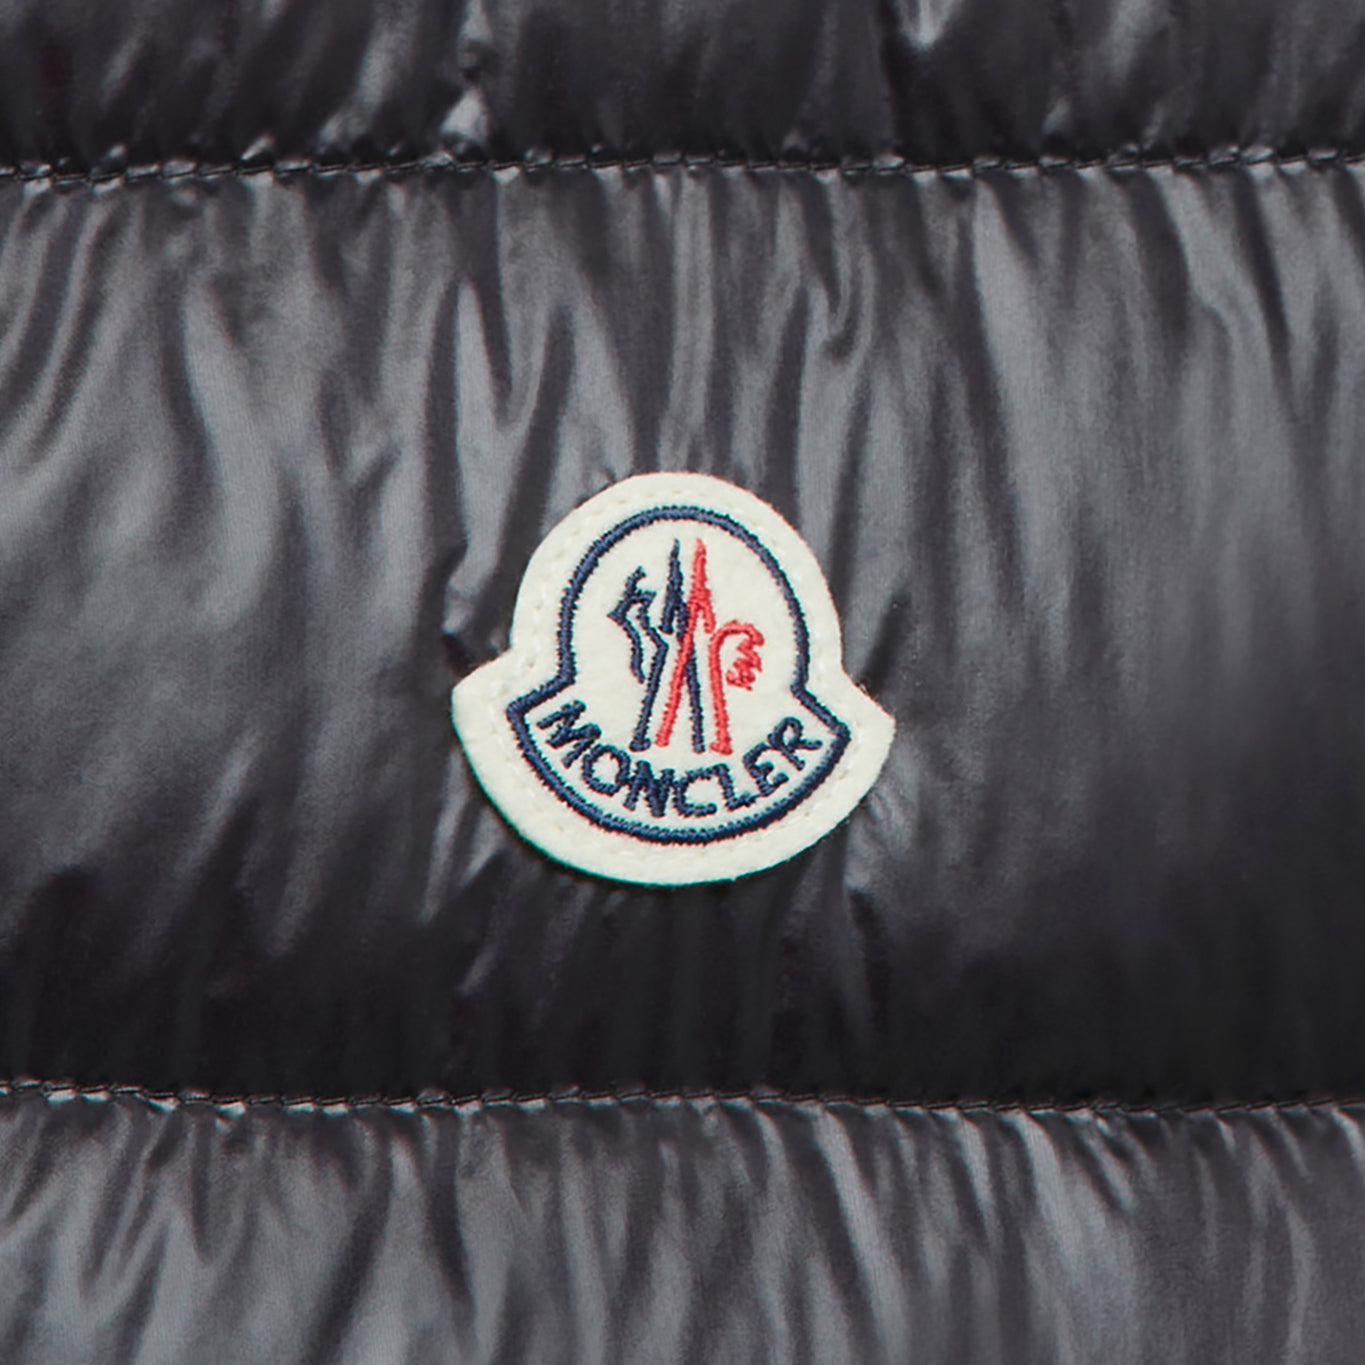 Moncler Gui Quilted Down Gilet